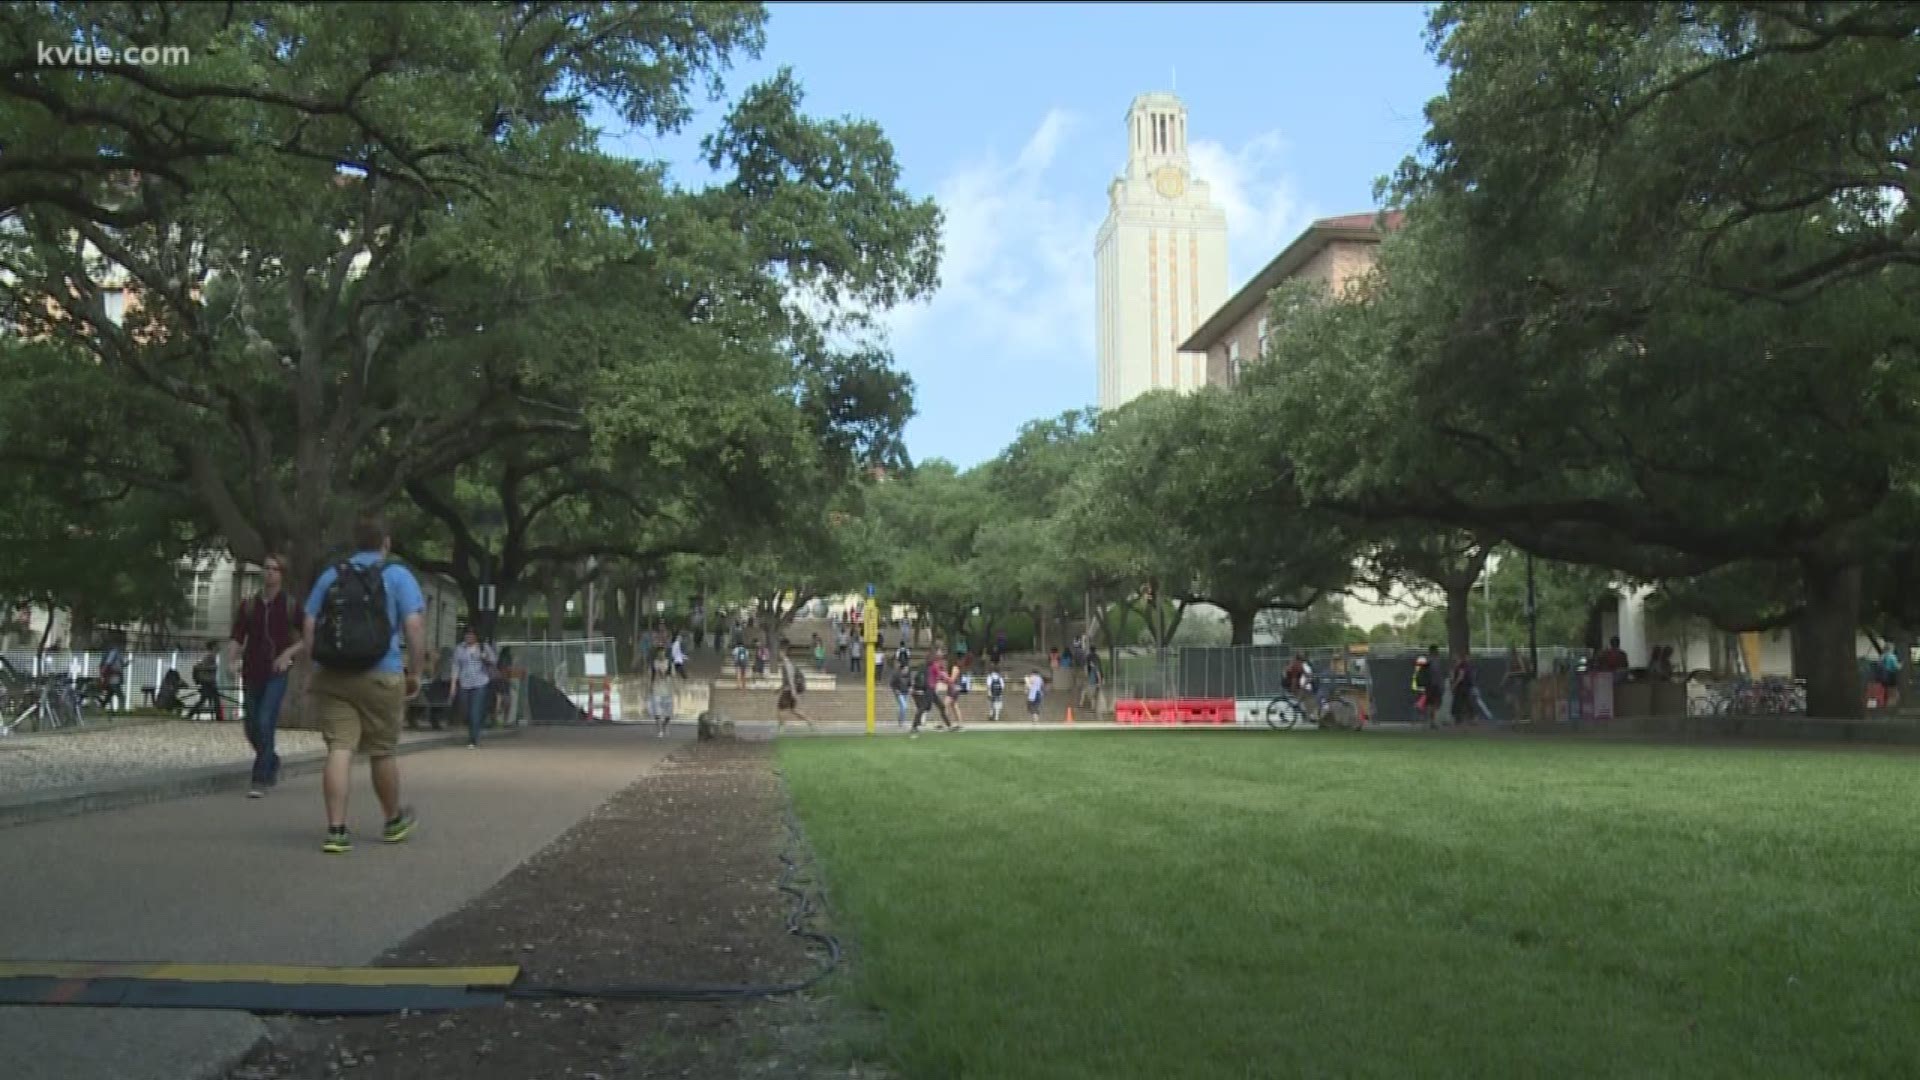 The federal government is investigating whether colleges named in a nationwide admissions scandal did anything wrong, and the University of Texas is on the list.